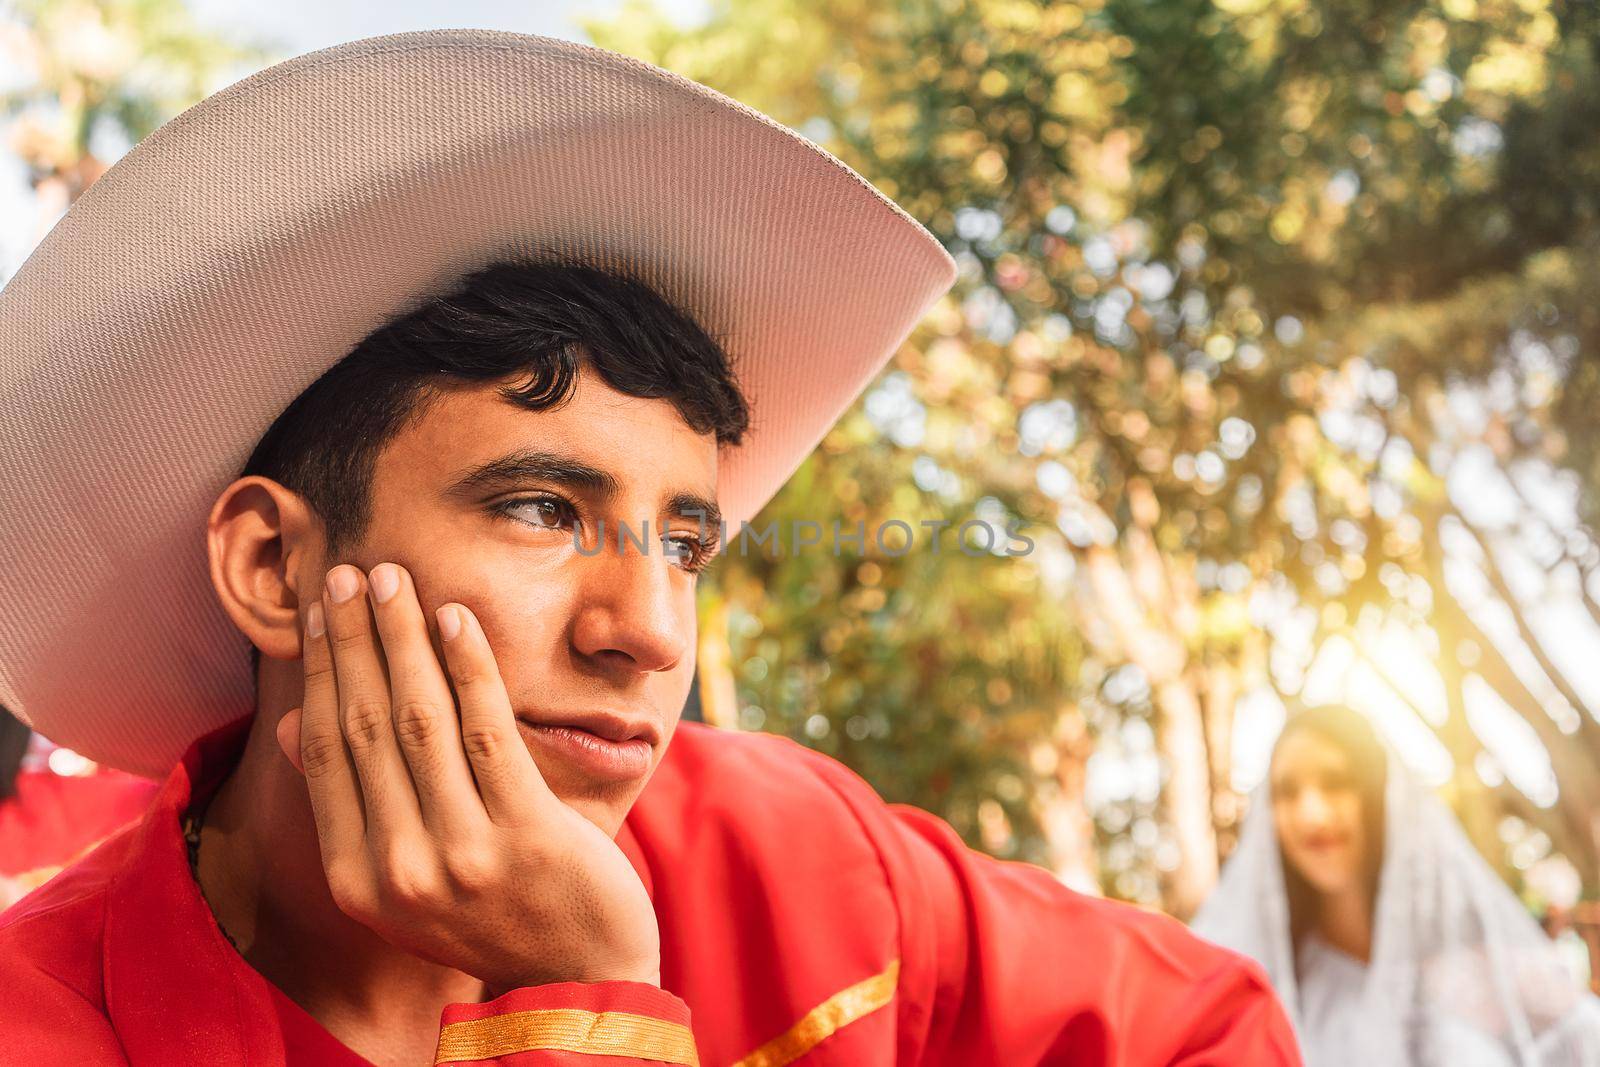 Latino teenager in love wearing traditional latinamerican clothes and hat outdoors in a park in Nicaragua by cfalvarez